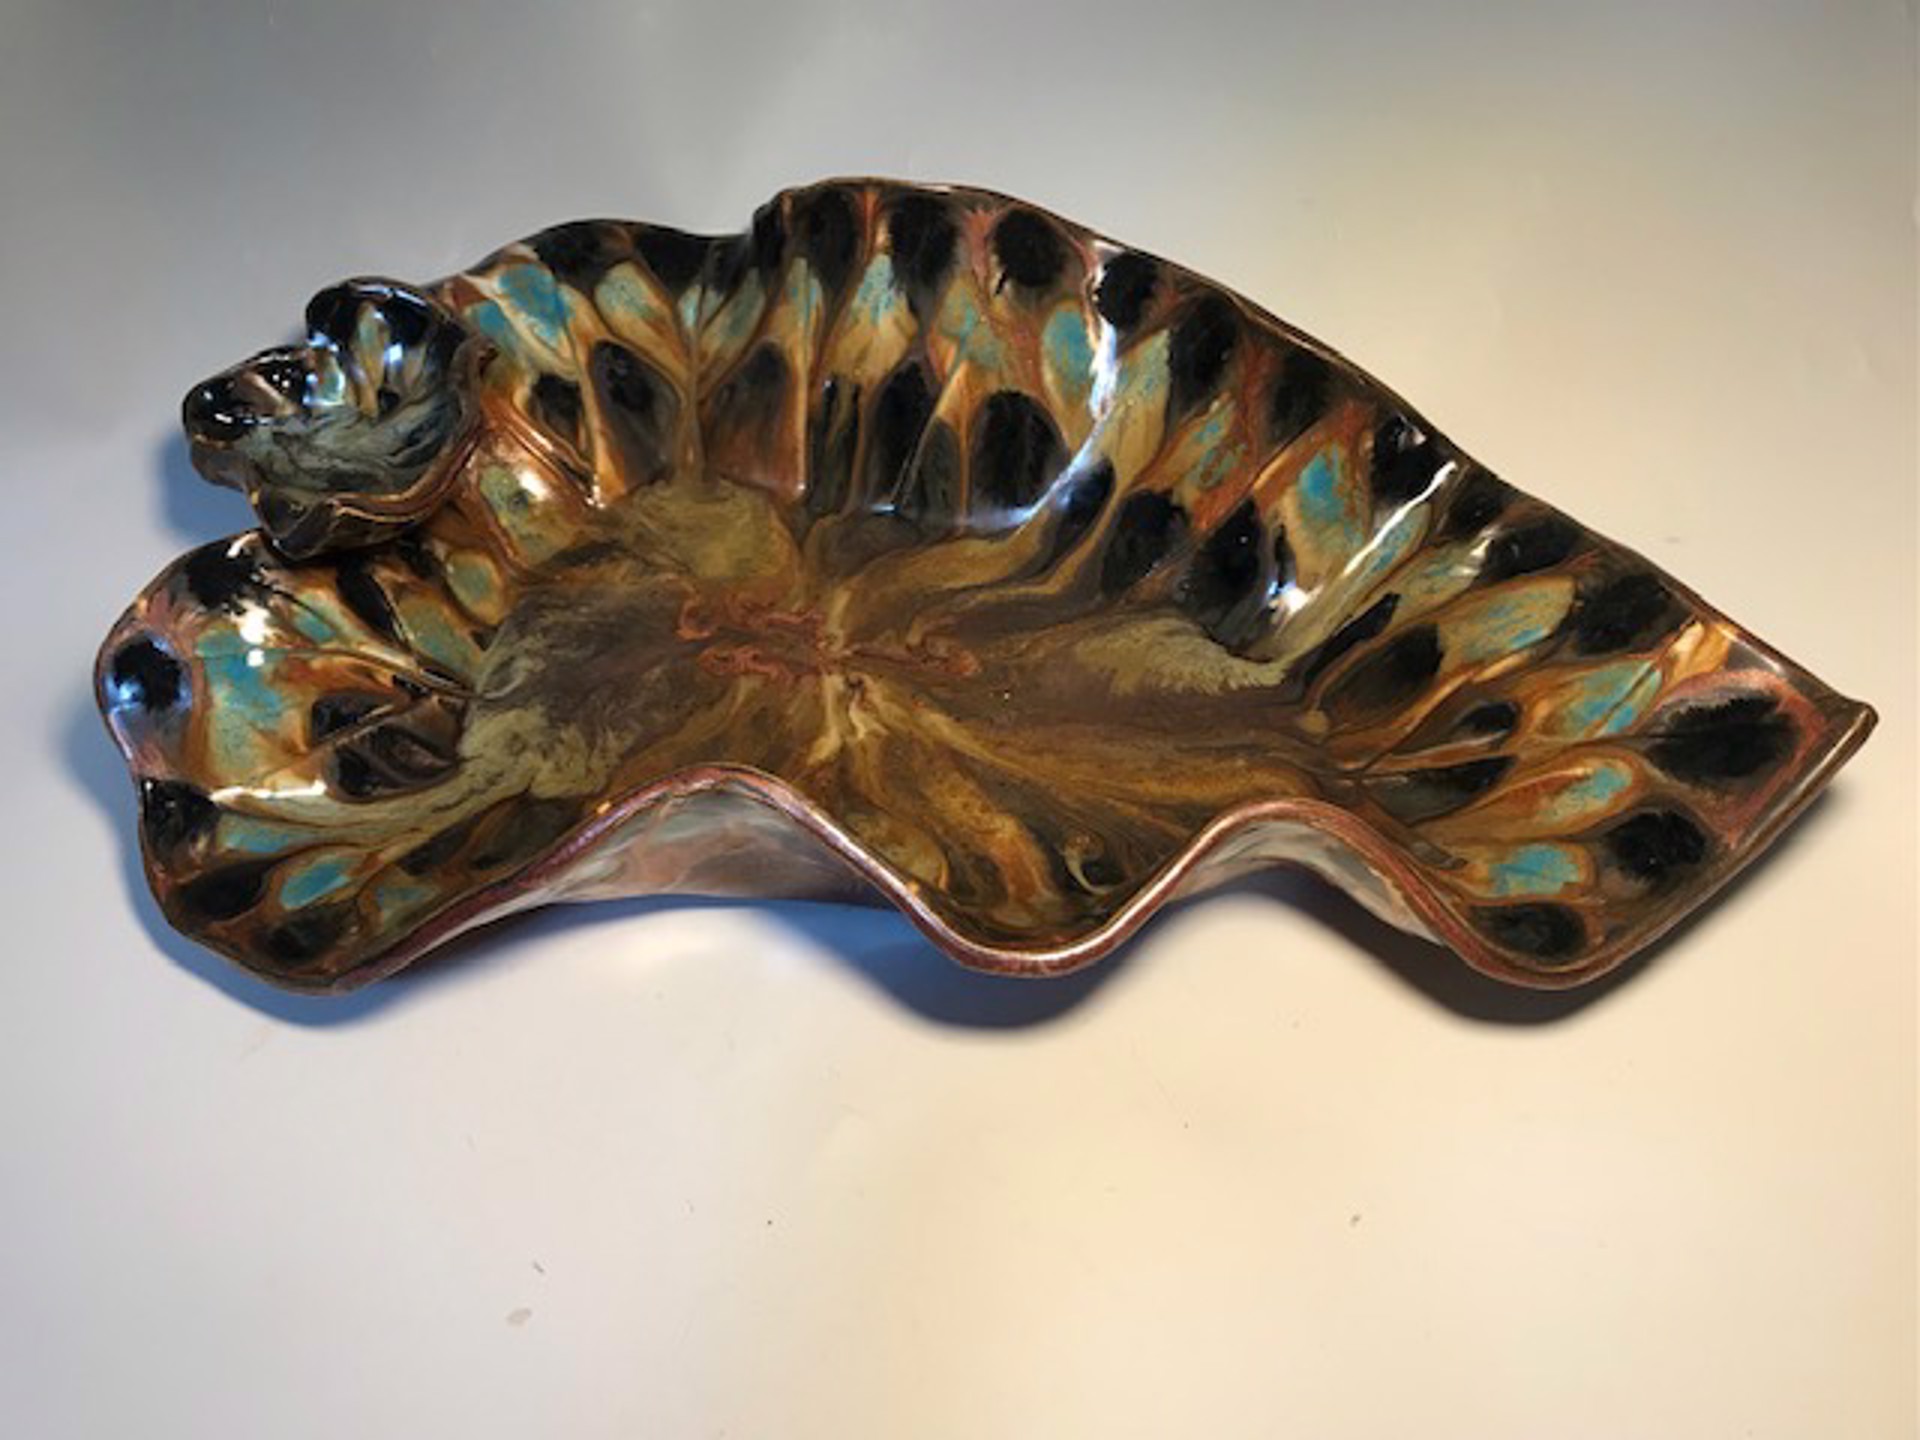 Large Leaf Serving Tray by Anna M. Elrod